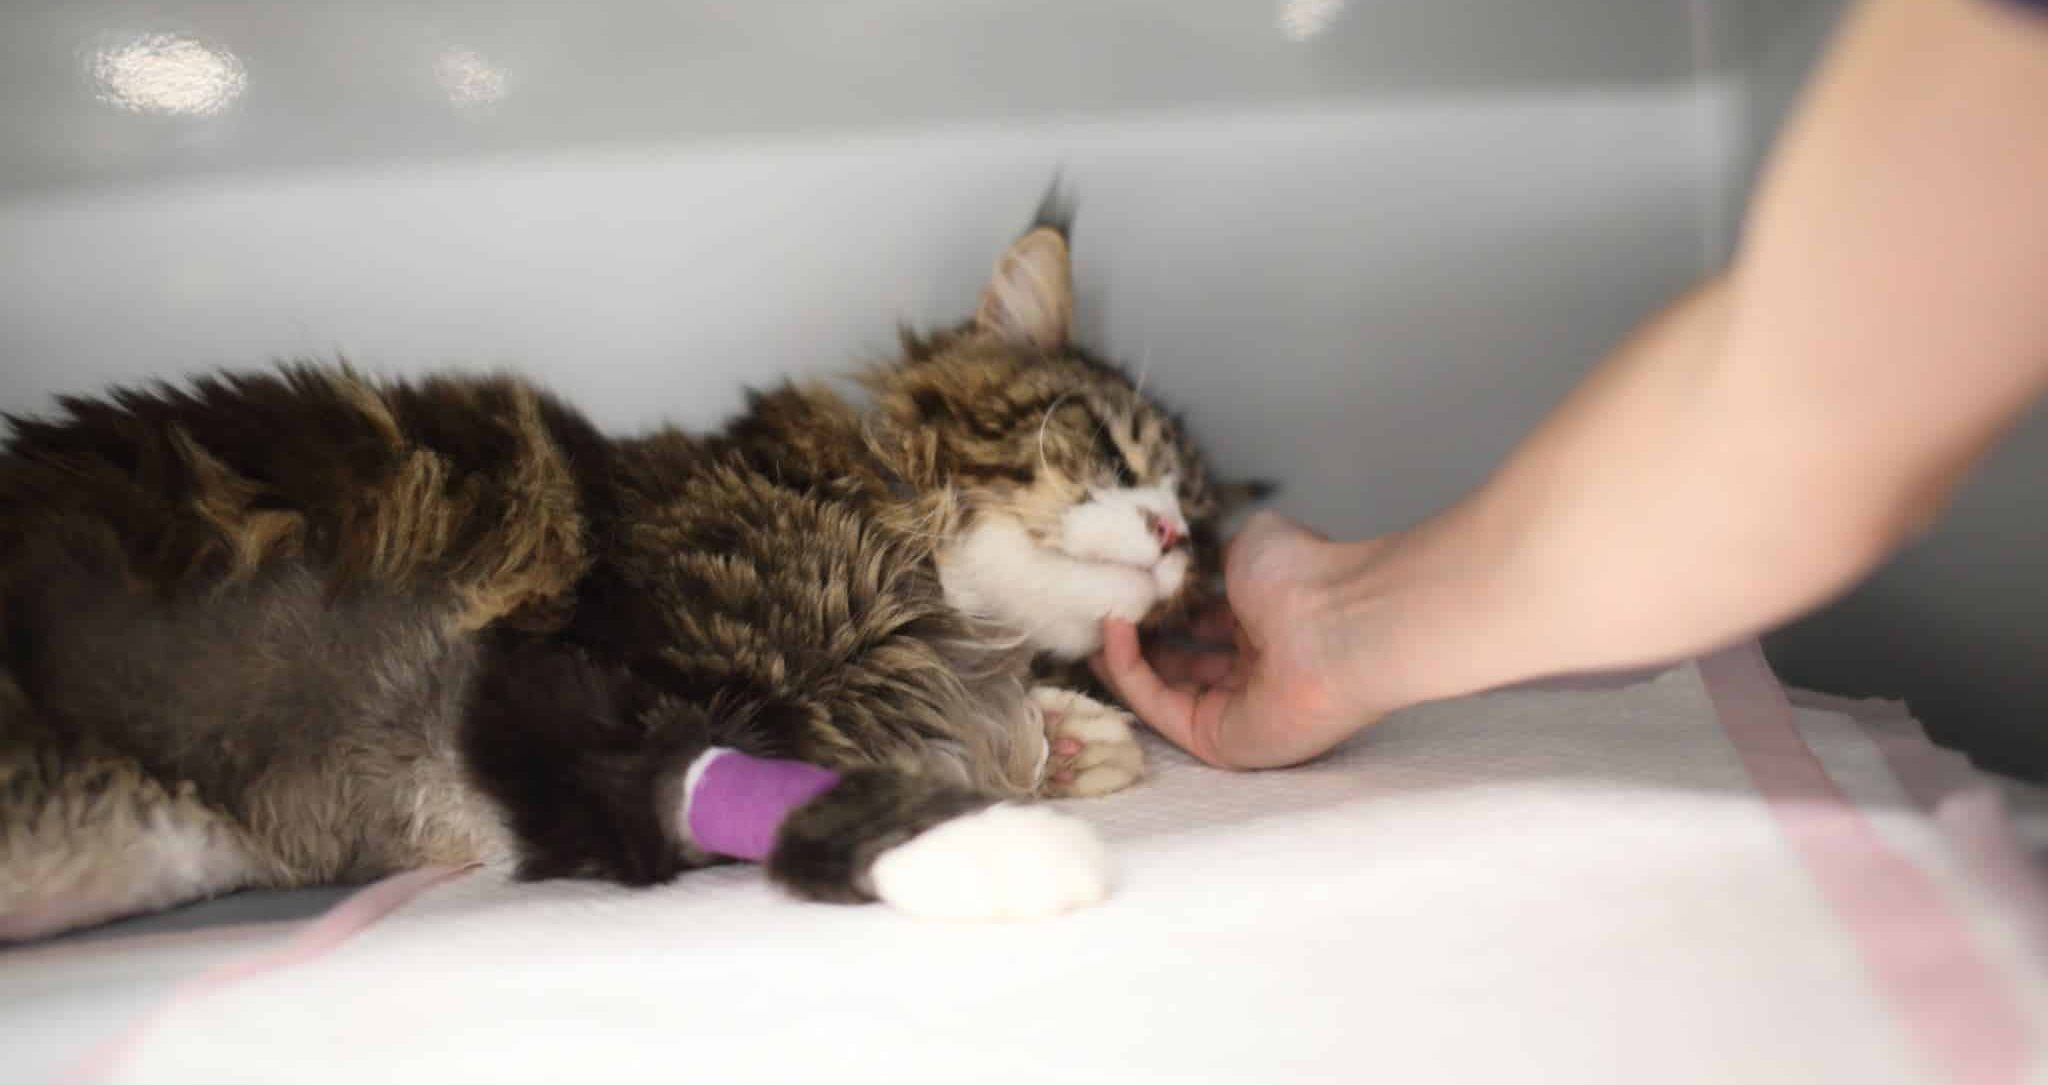 Feline Lower Urinary Tract Disease FLUTD cat recovering in cage